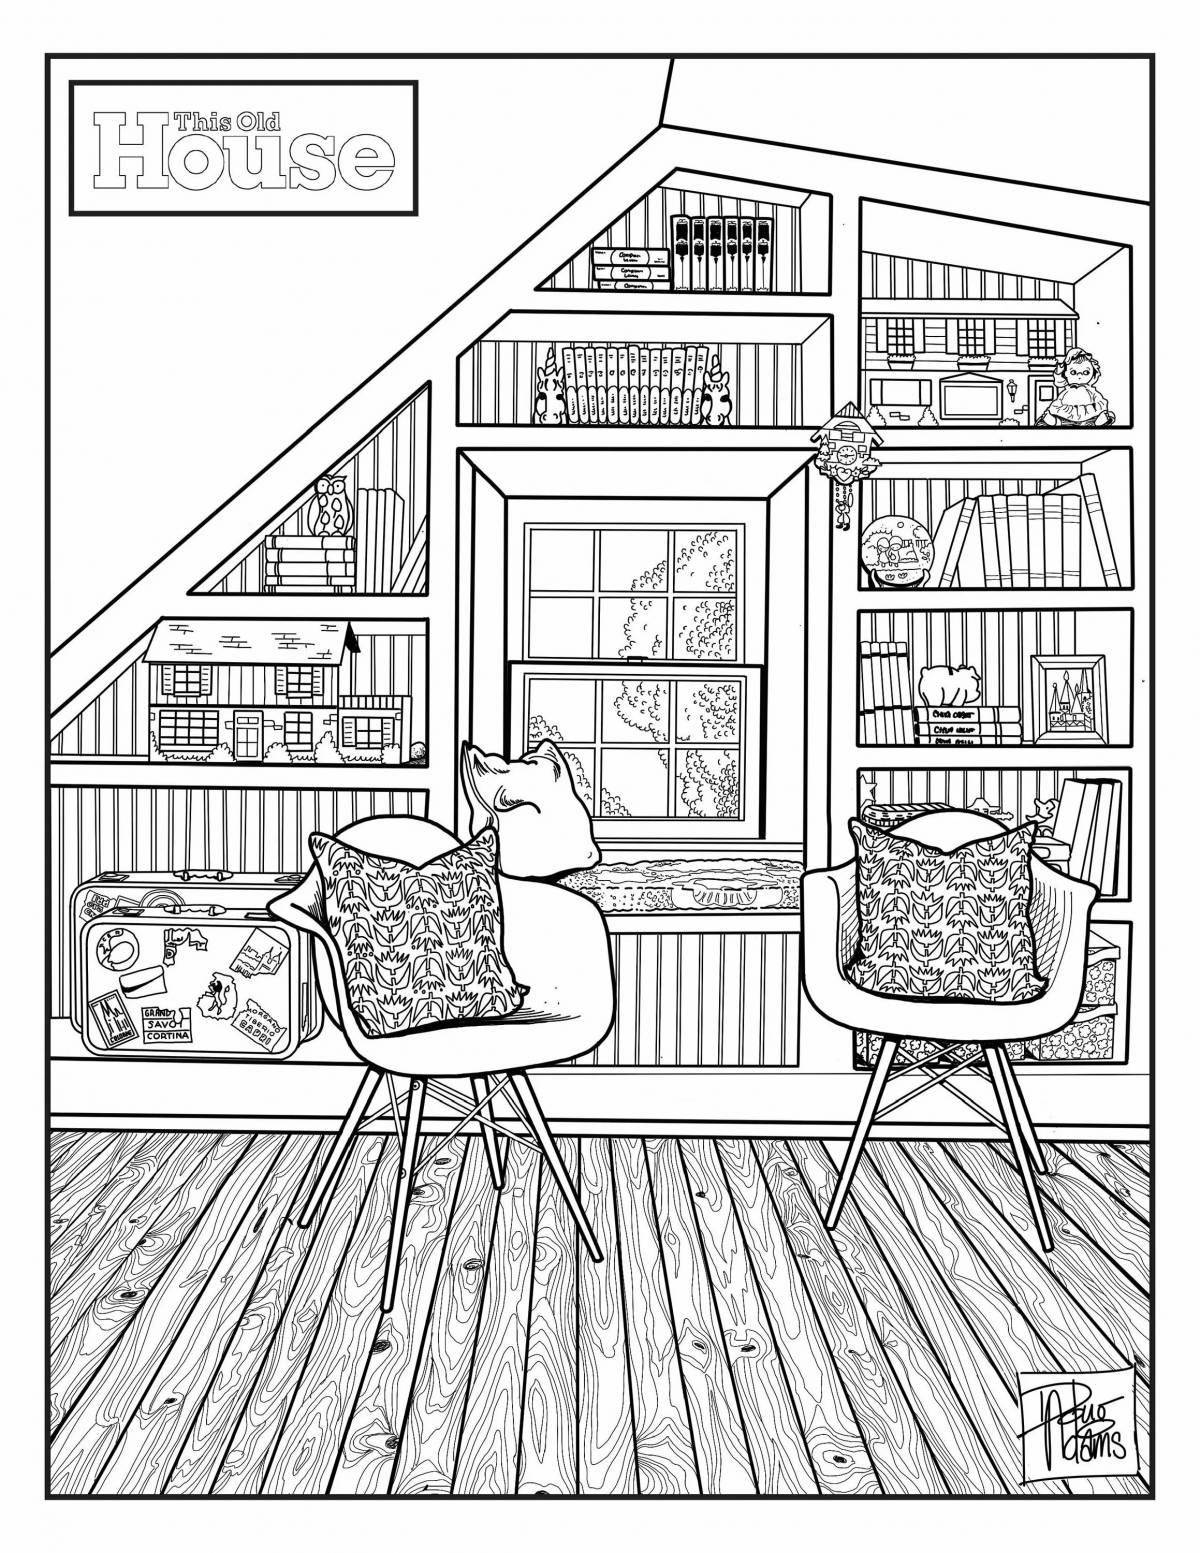 Coloring page joyful house for kids inside